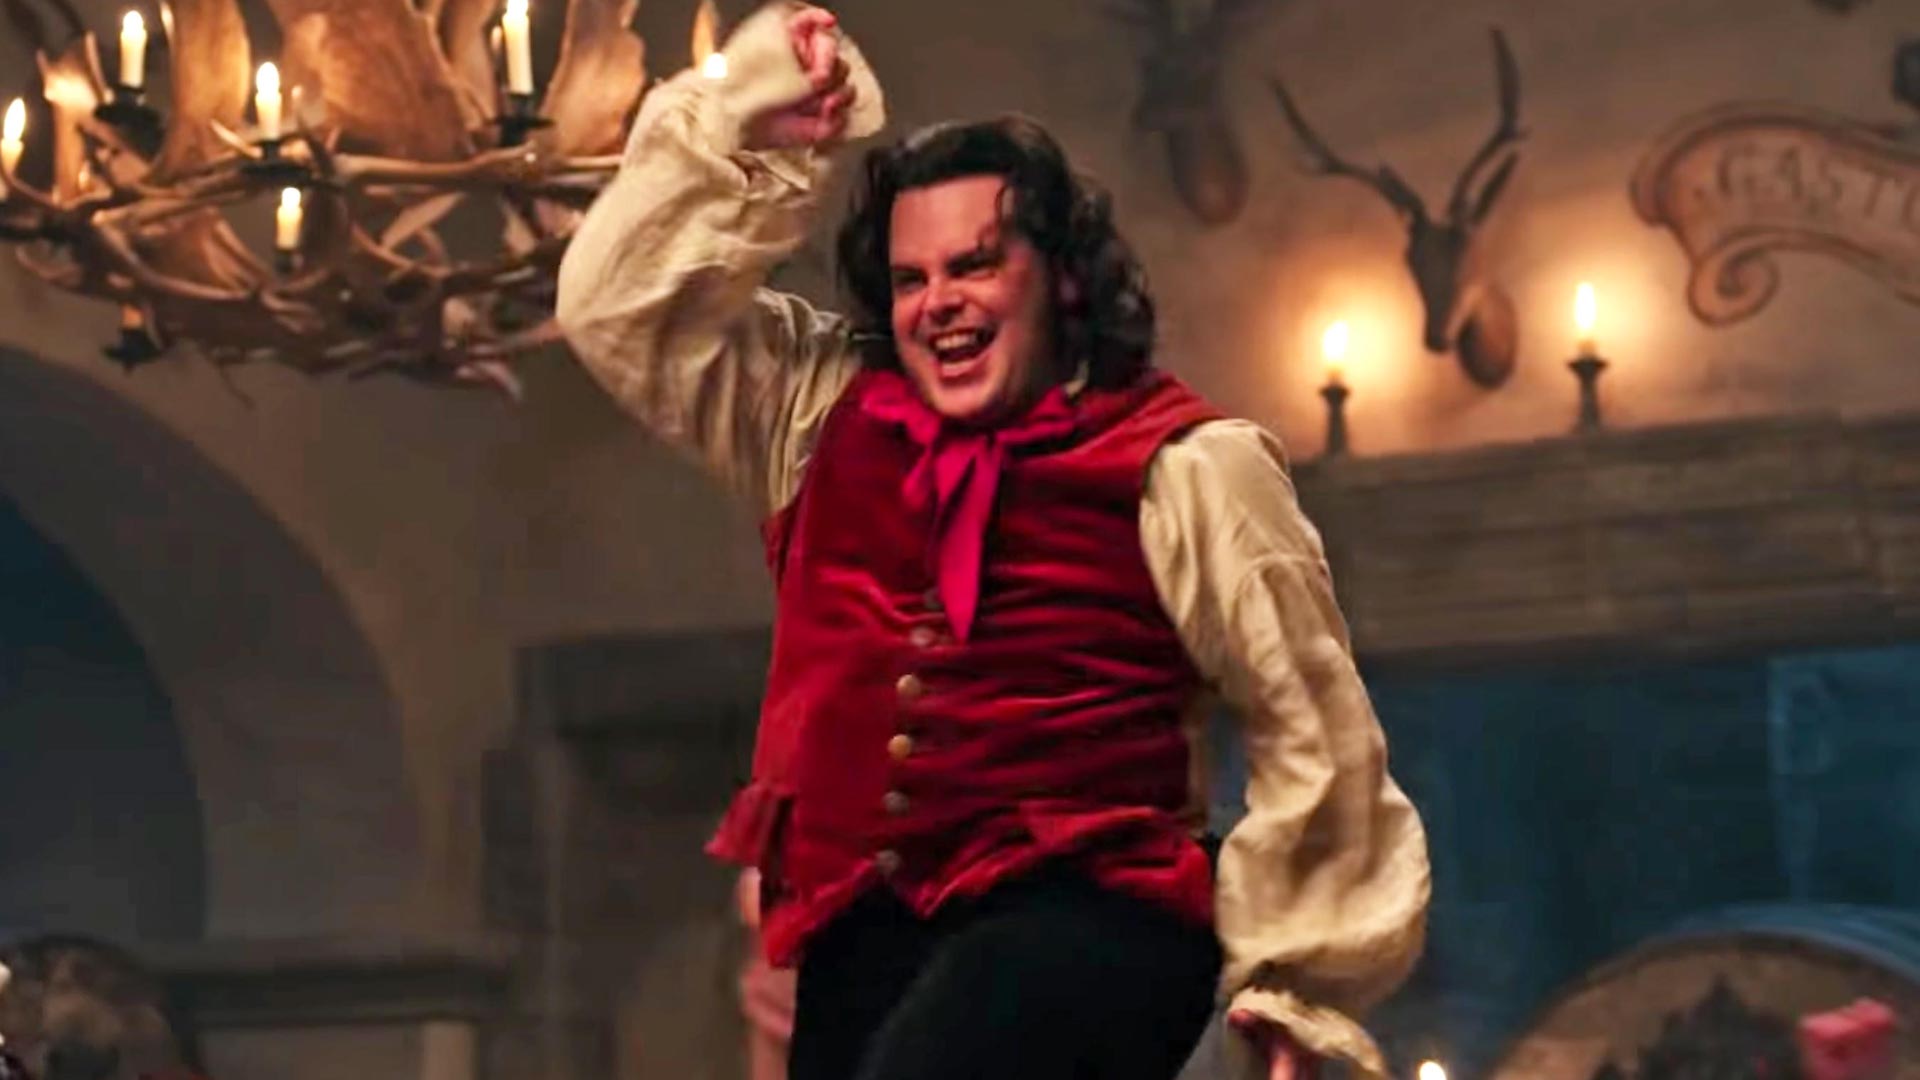 A scene from Beauty and the Beast